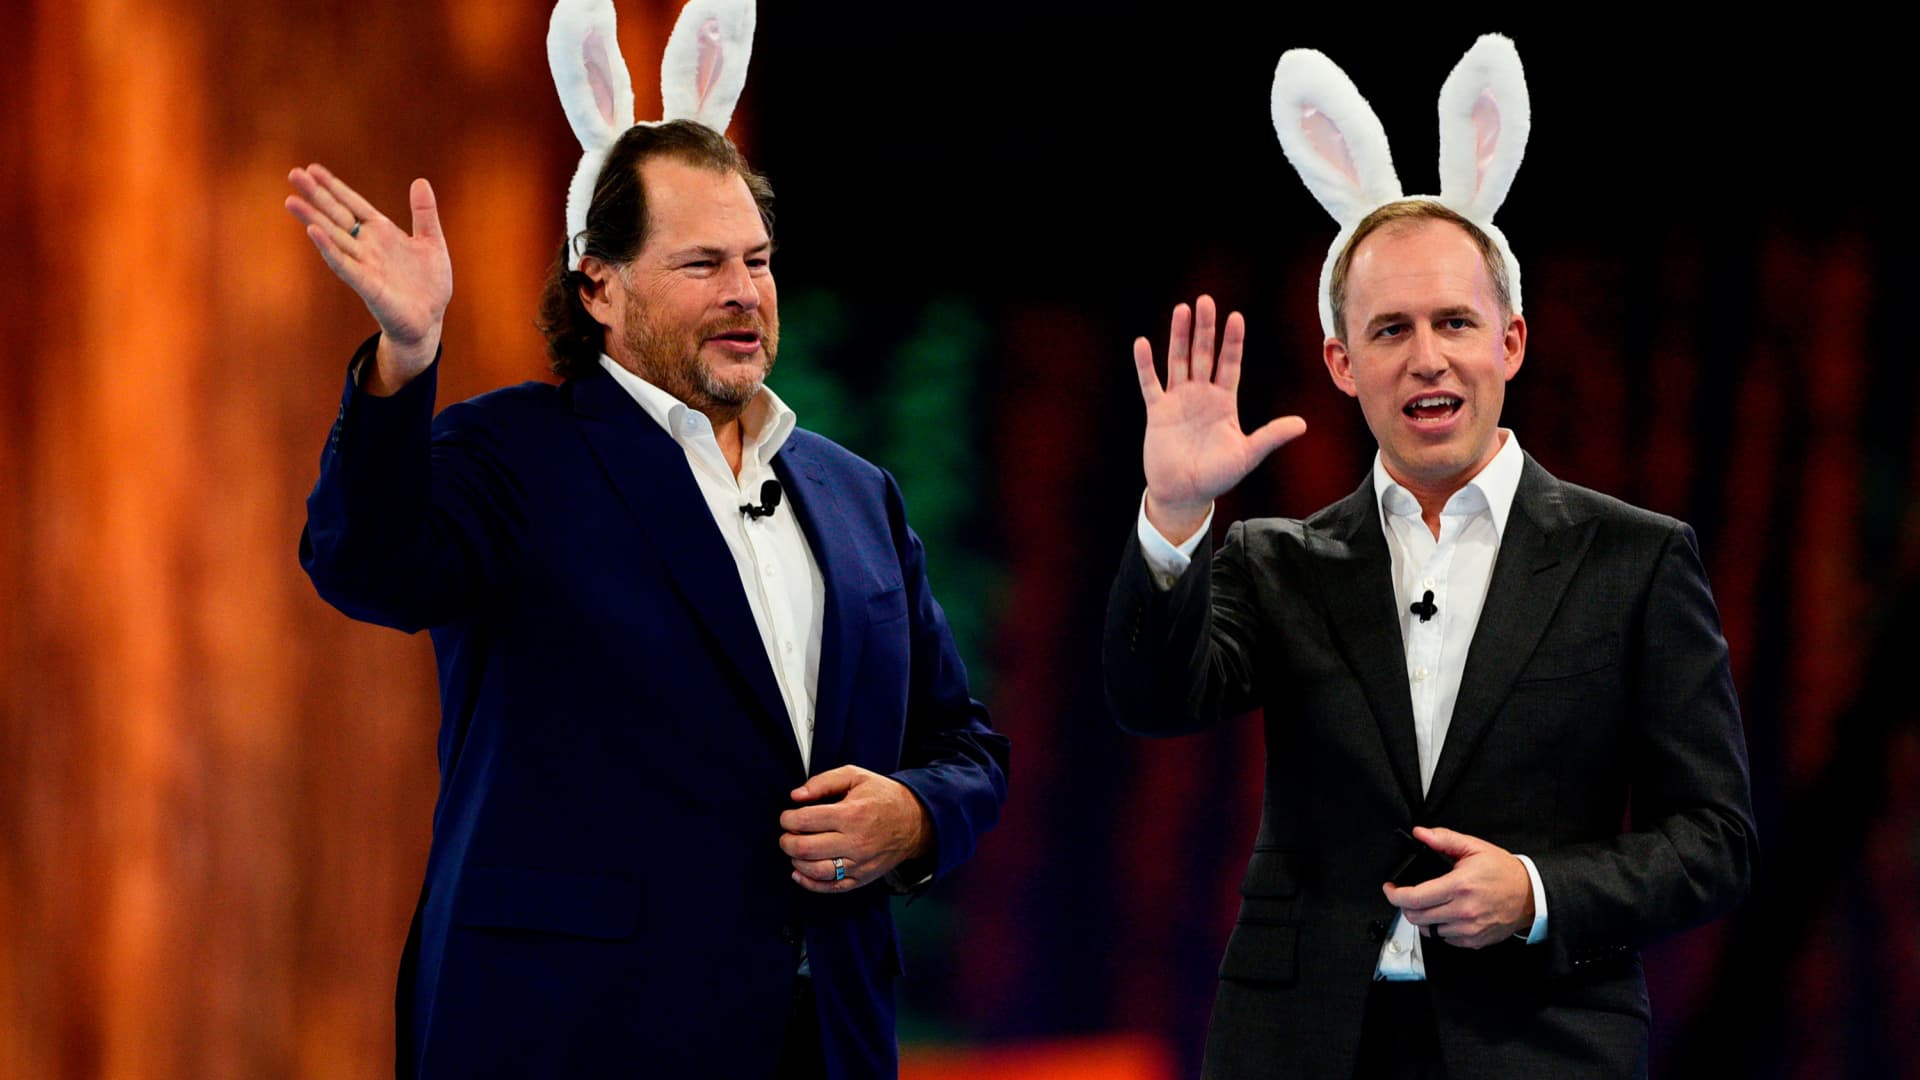 Bret Taylor, co-chief executive officer of Salesforce.com Inc., right, and Marc Benioff, co-chief executive officer of Salesforce.com Inc., wear rabbit ears during a keynote at the 2022 Dreamforce conference in San Francisco, California, on Tuesday, Sept. 20, 2022.